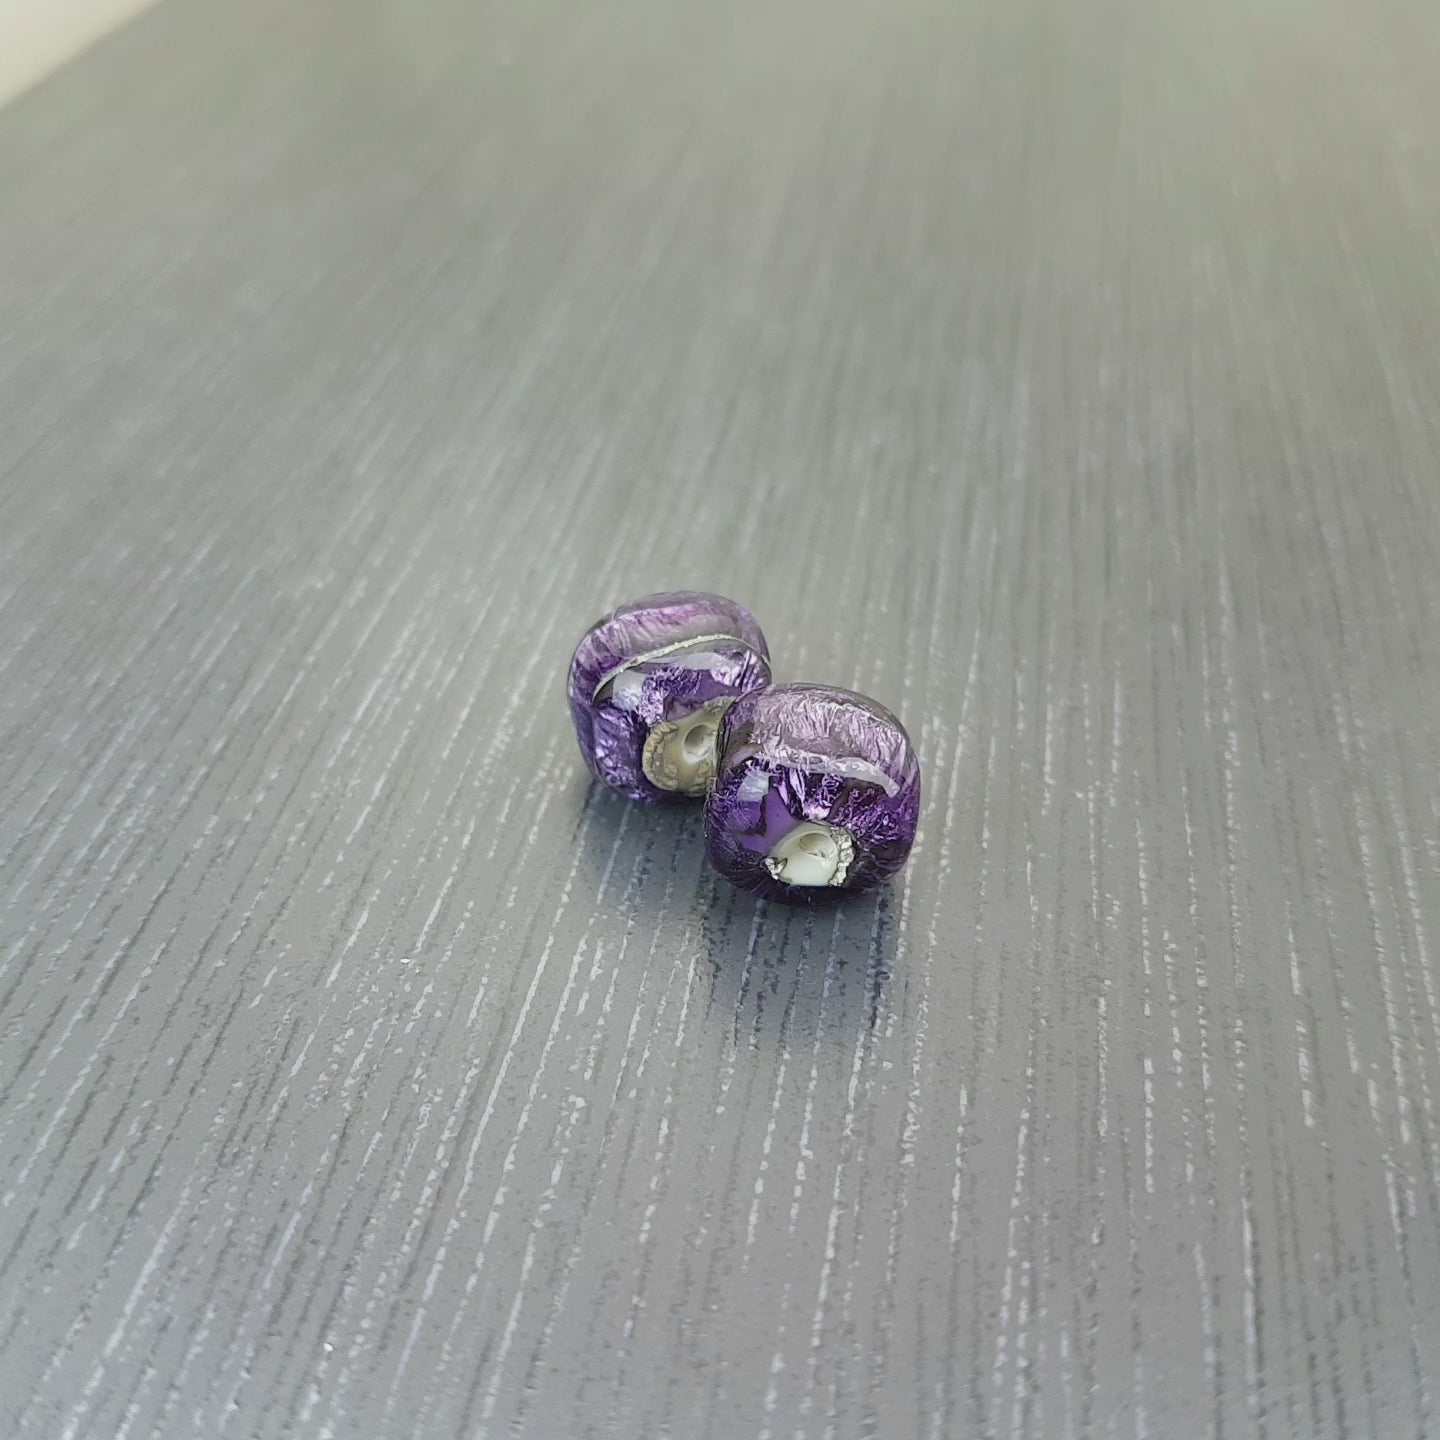 sparkling purple lampwork glass bead pair shaped like cubes or dice 